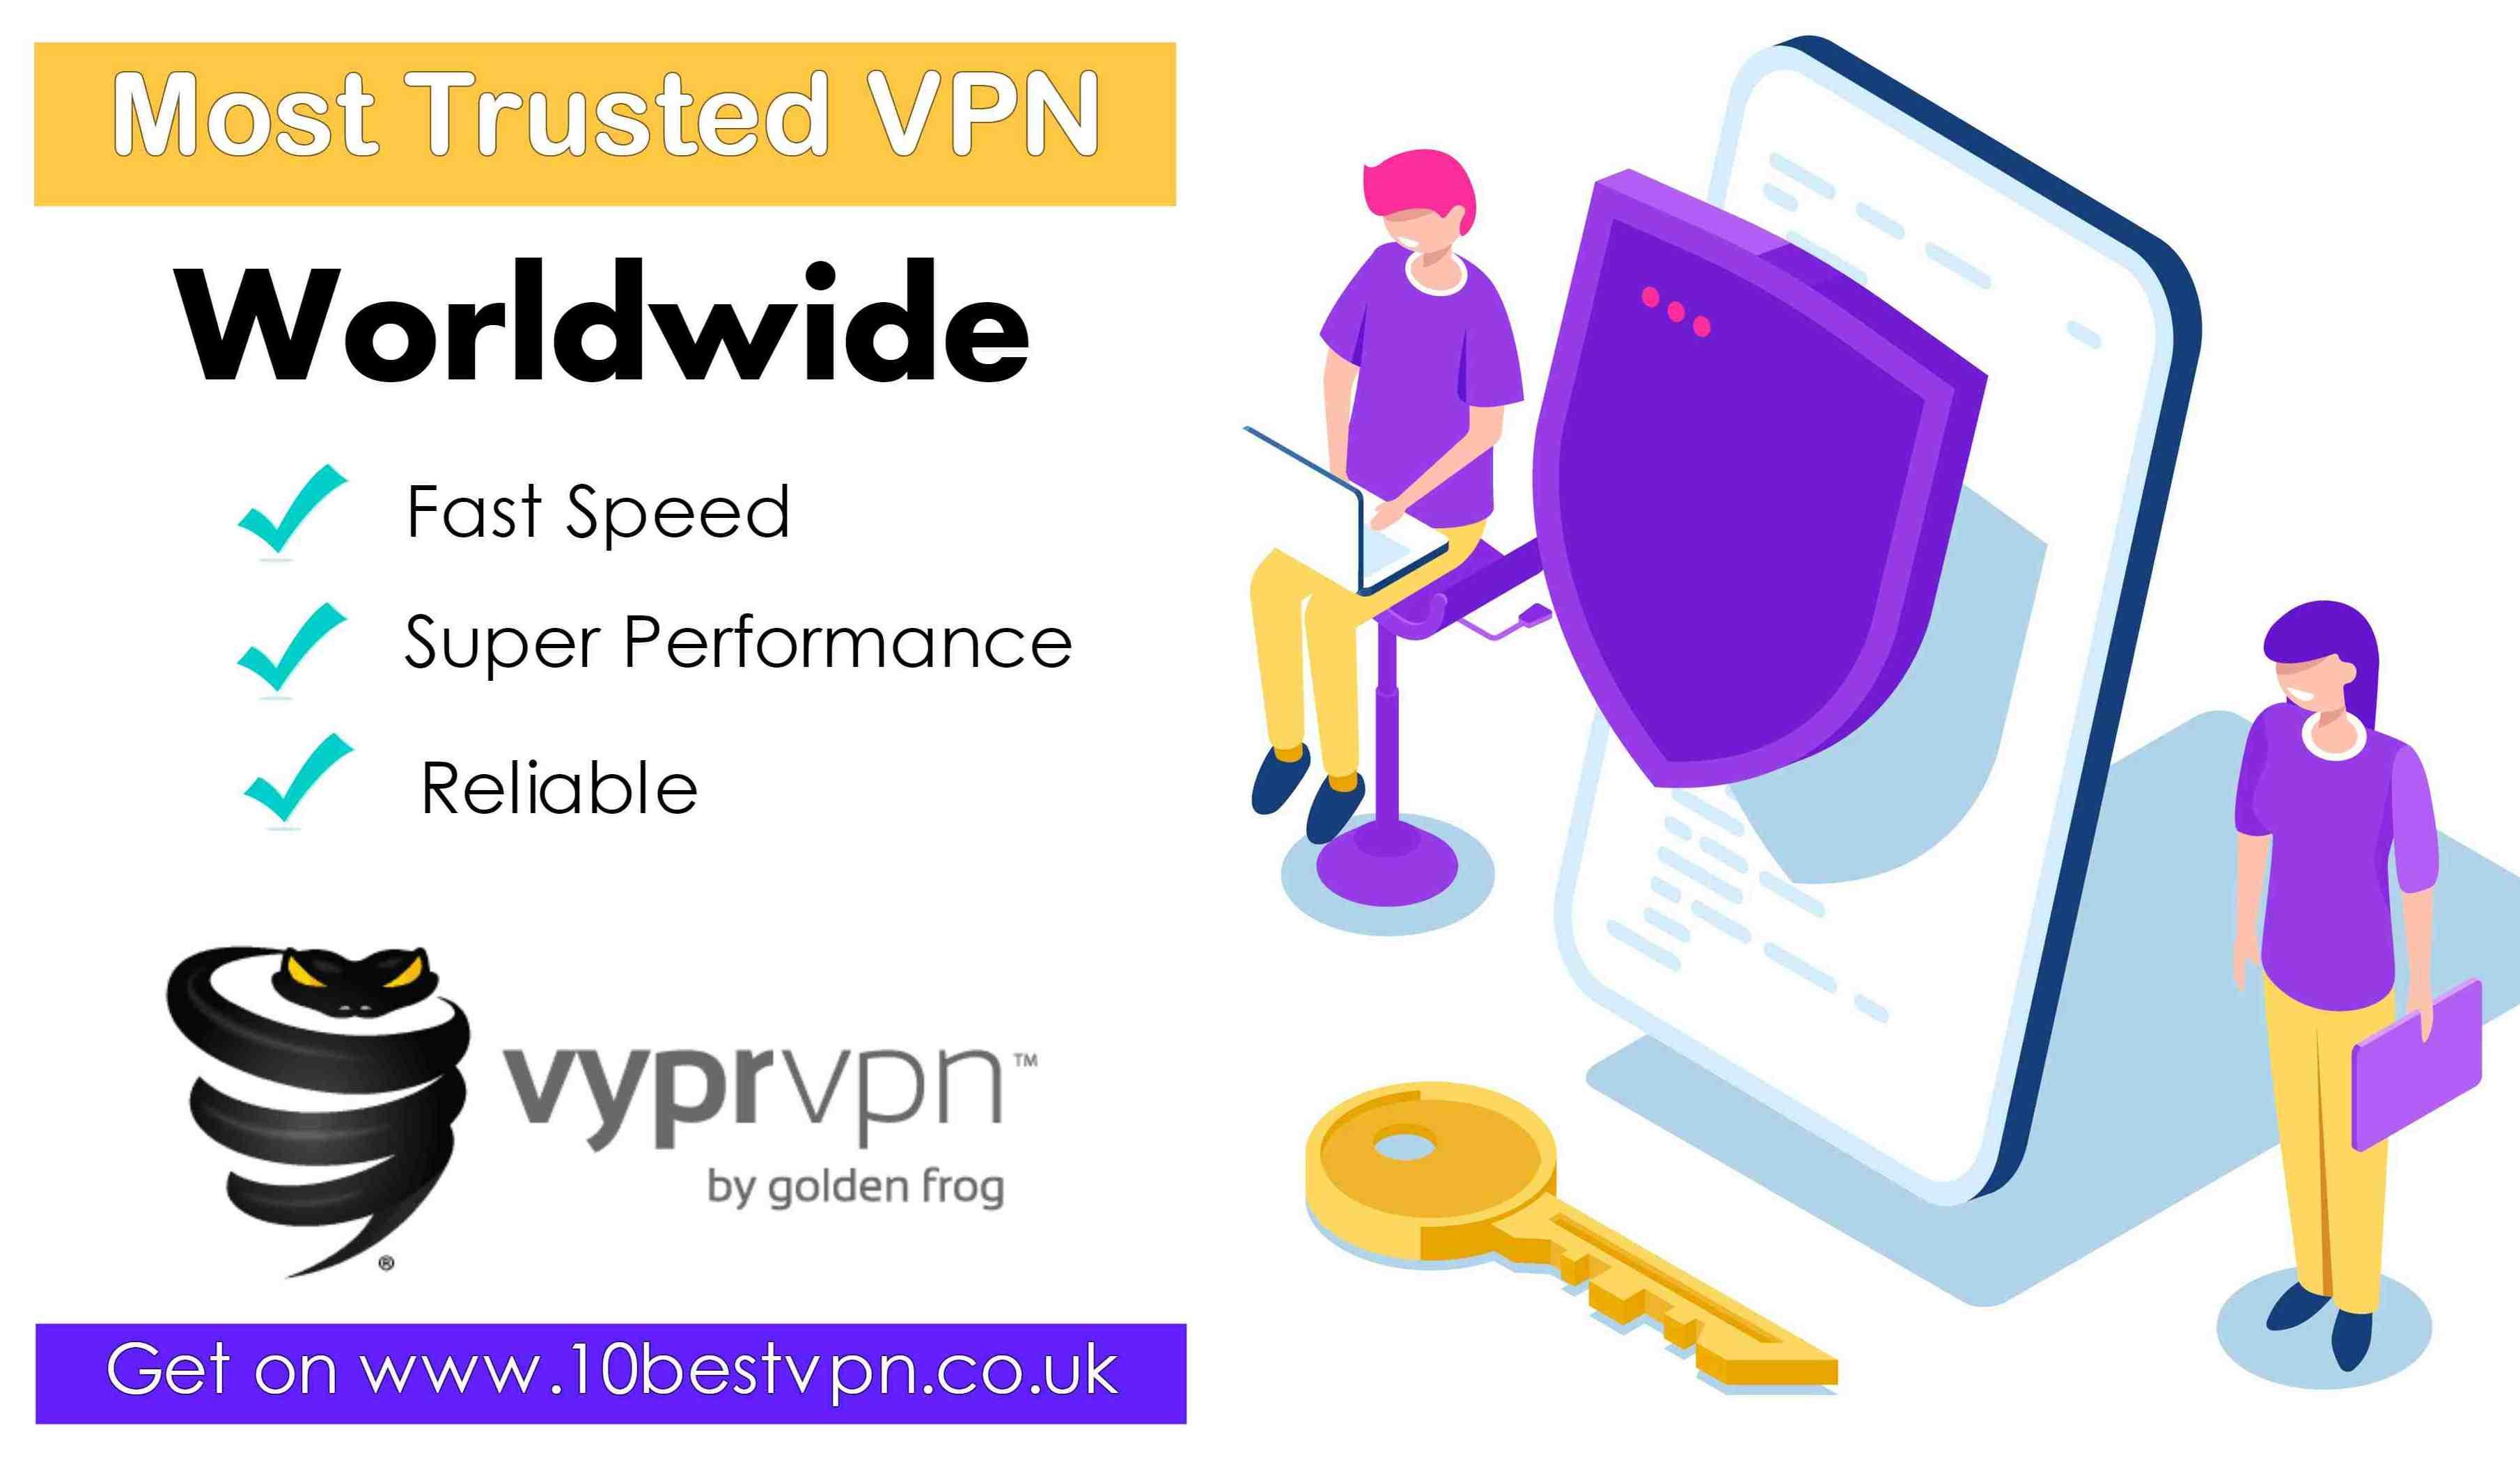 Image - VyprVPN is one of the big names in online privacy having approx 2 million customers worldwide. #VyprVPN claim...